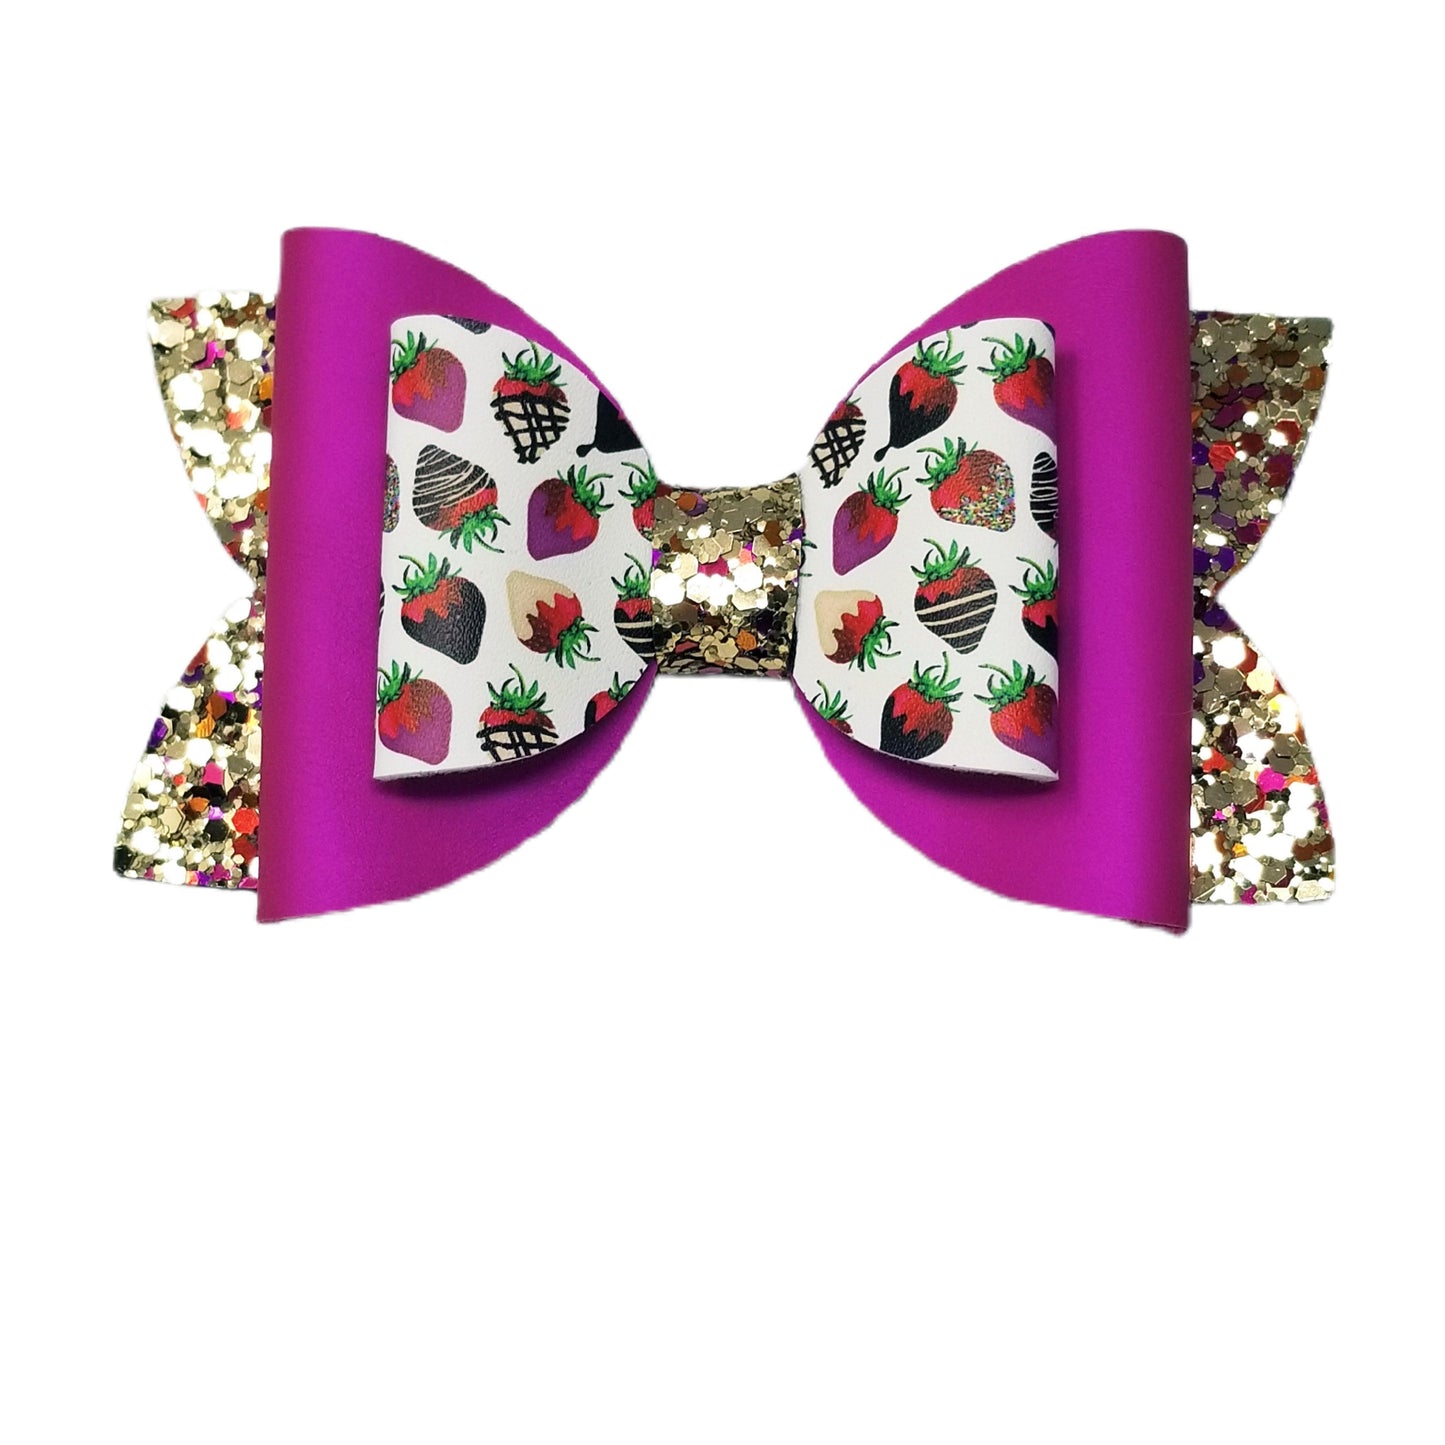 Chocolate-covered Strawberries Double Diva Bow 5"